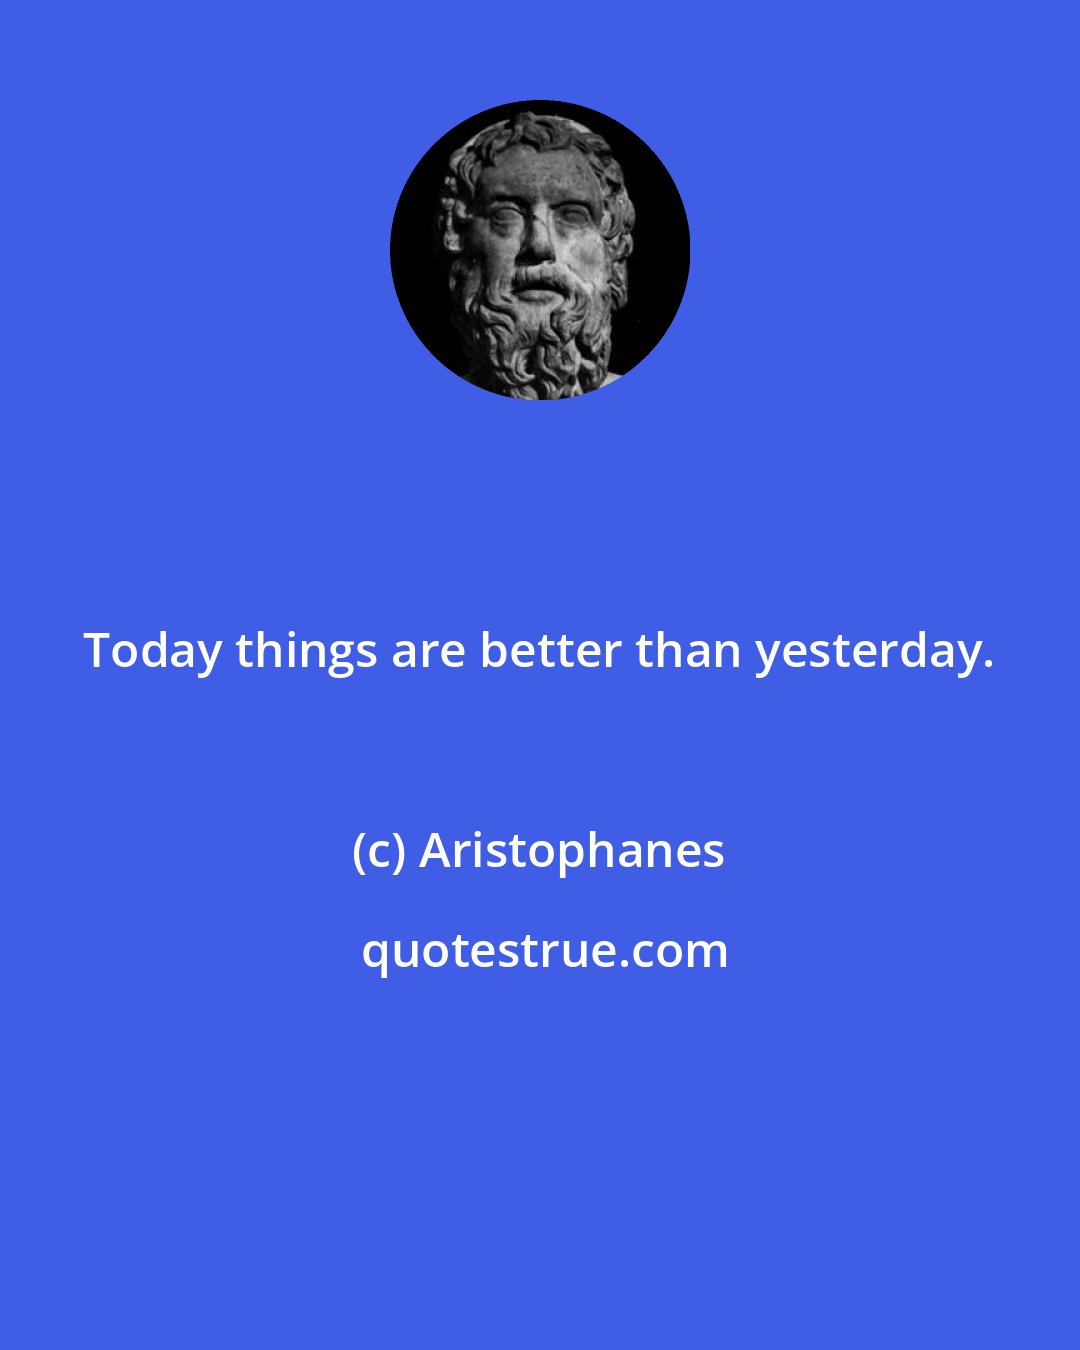 Aristophanes: Today things are better than yesterday.